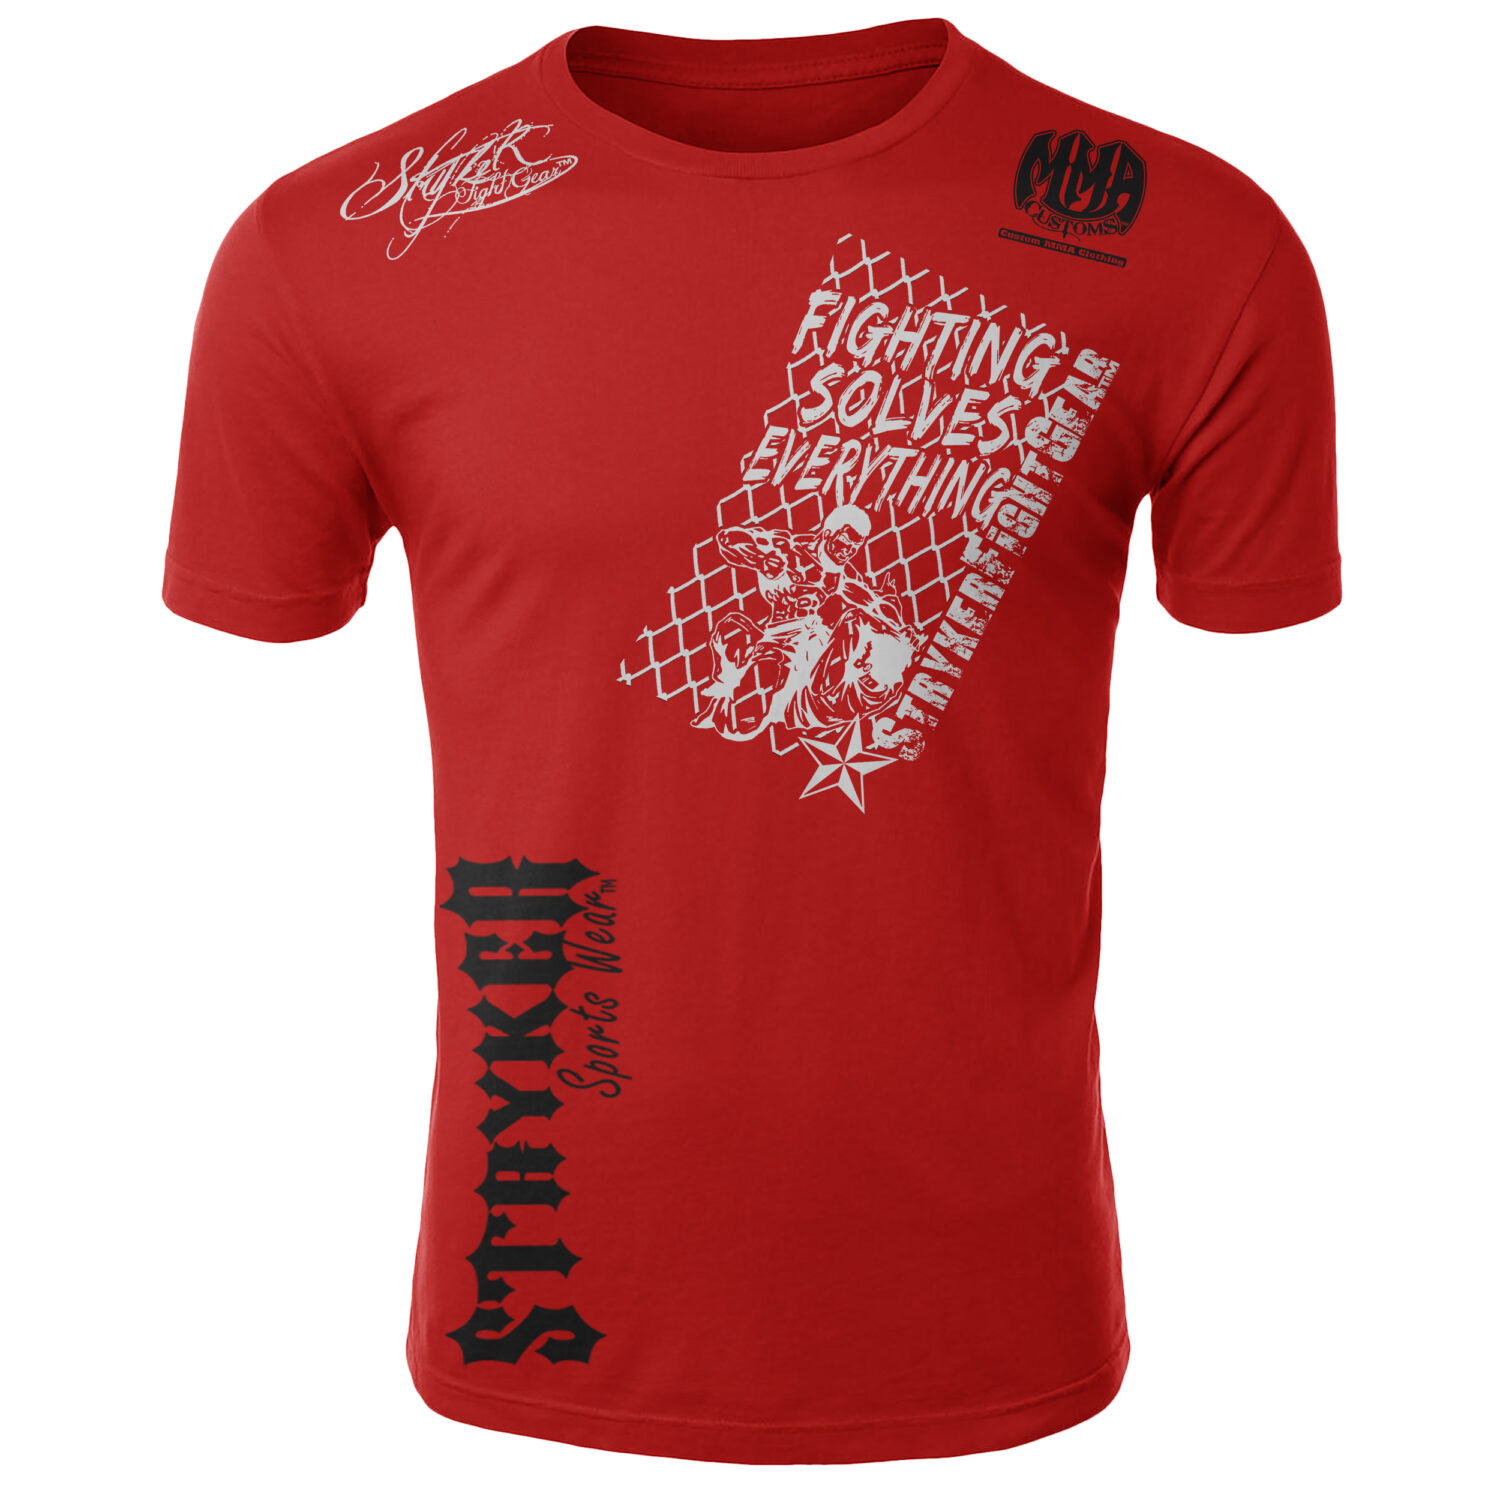 Stryker Fight Gear Fighting Solves Everything Adult MMA T - Shirt